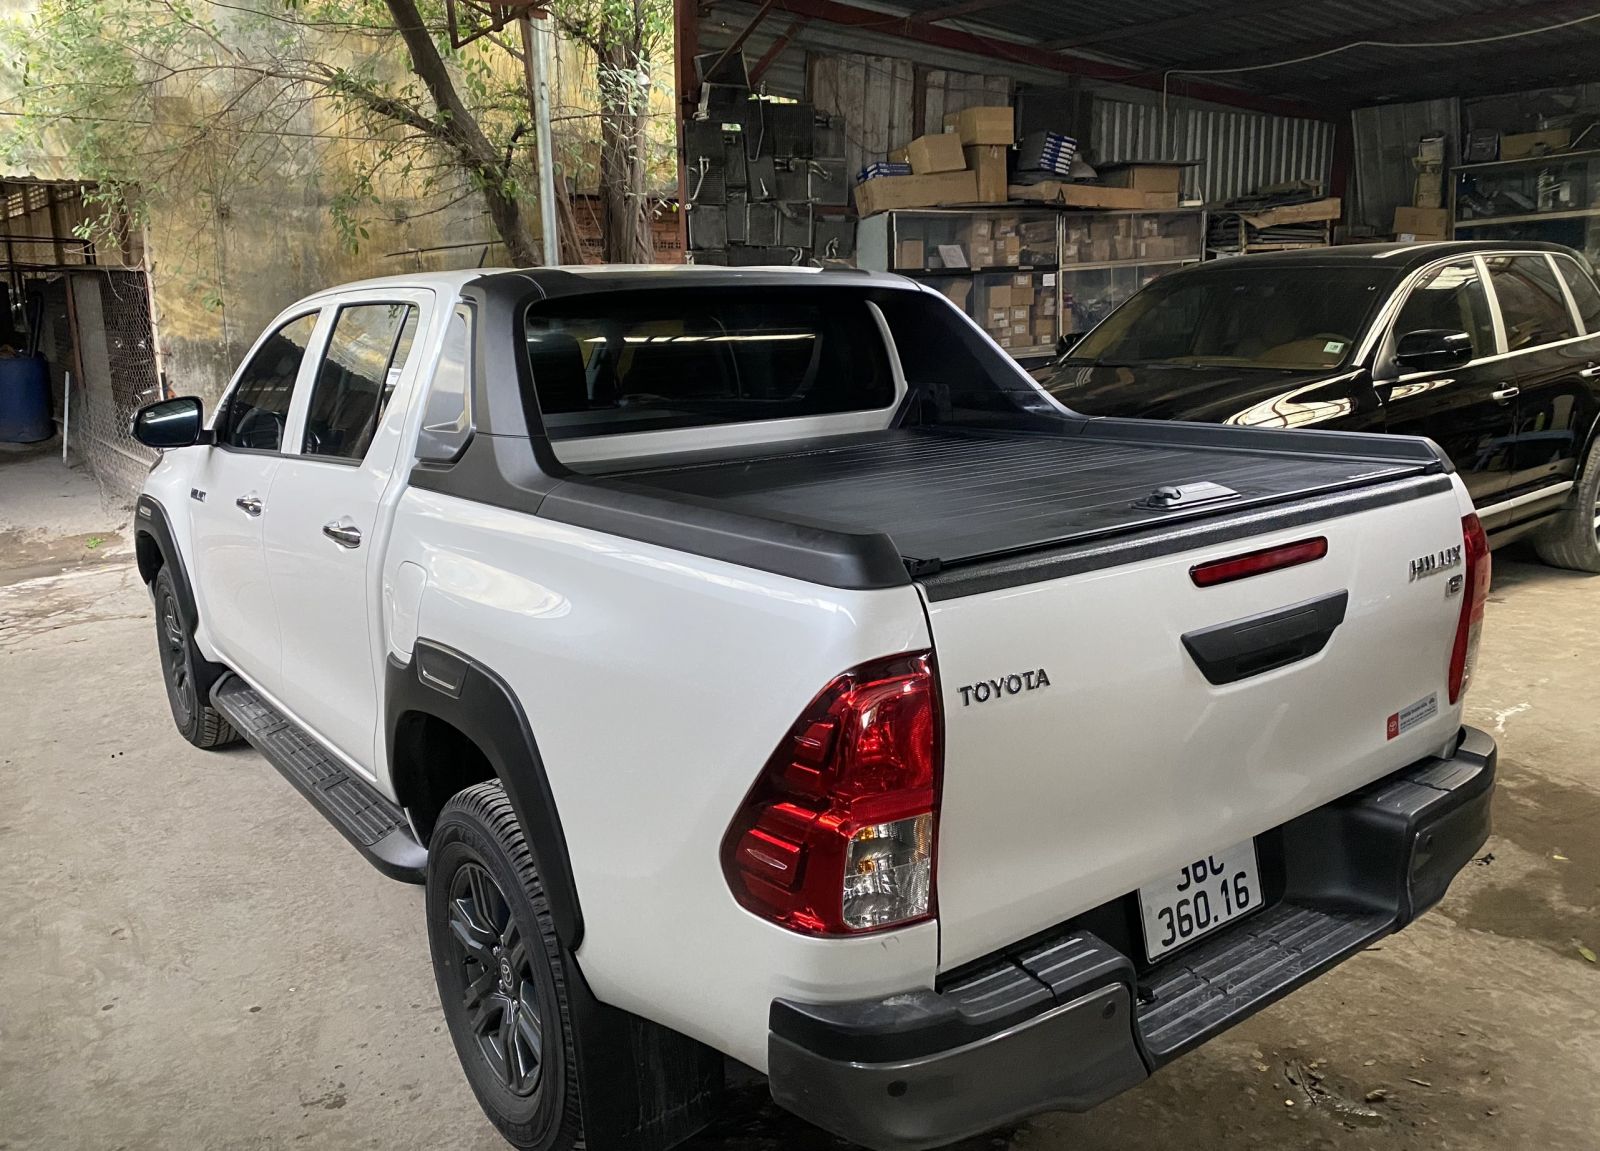 Thanh thể thao Hilux Adventure